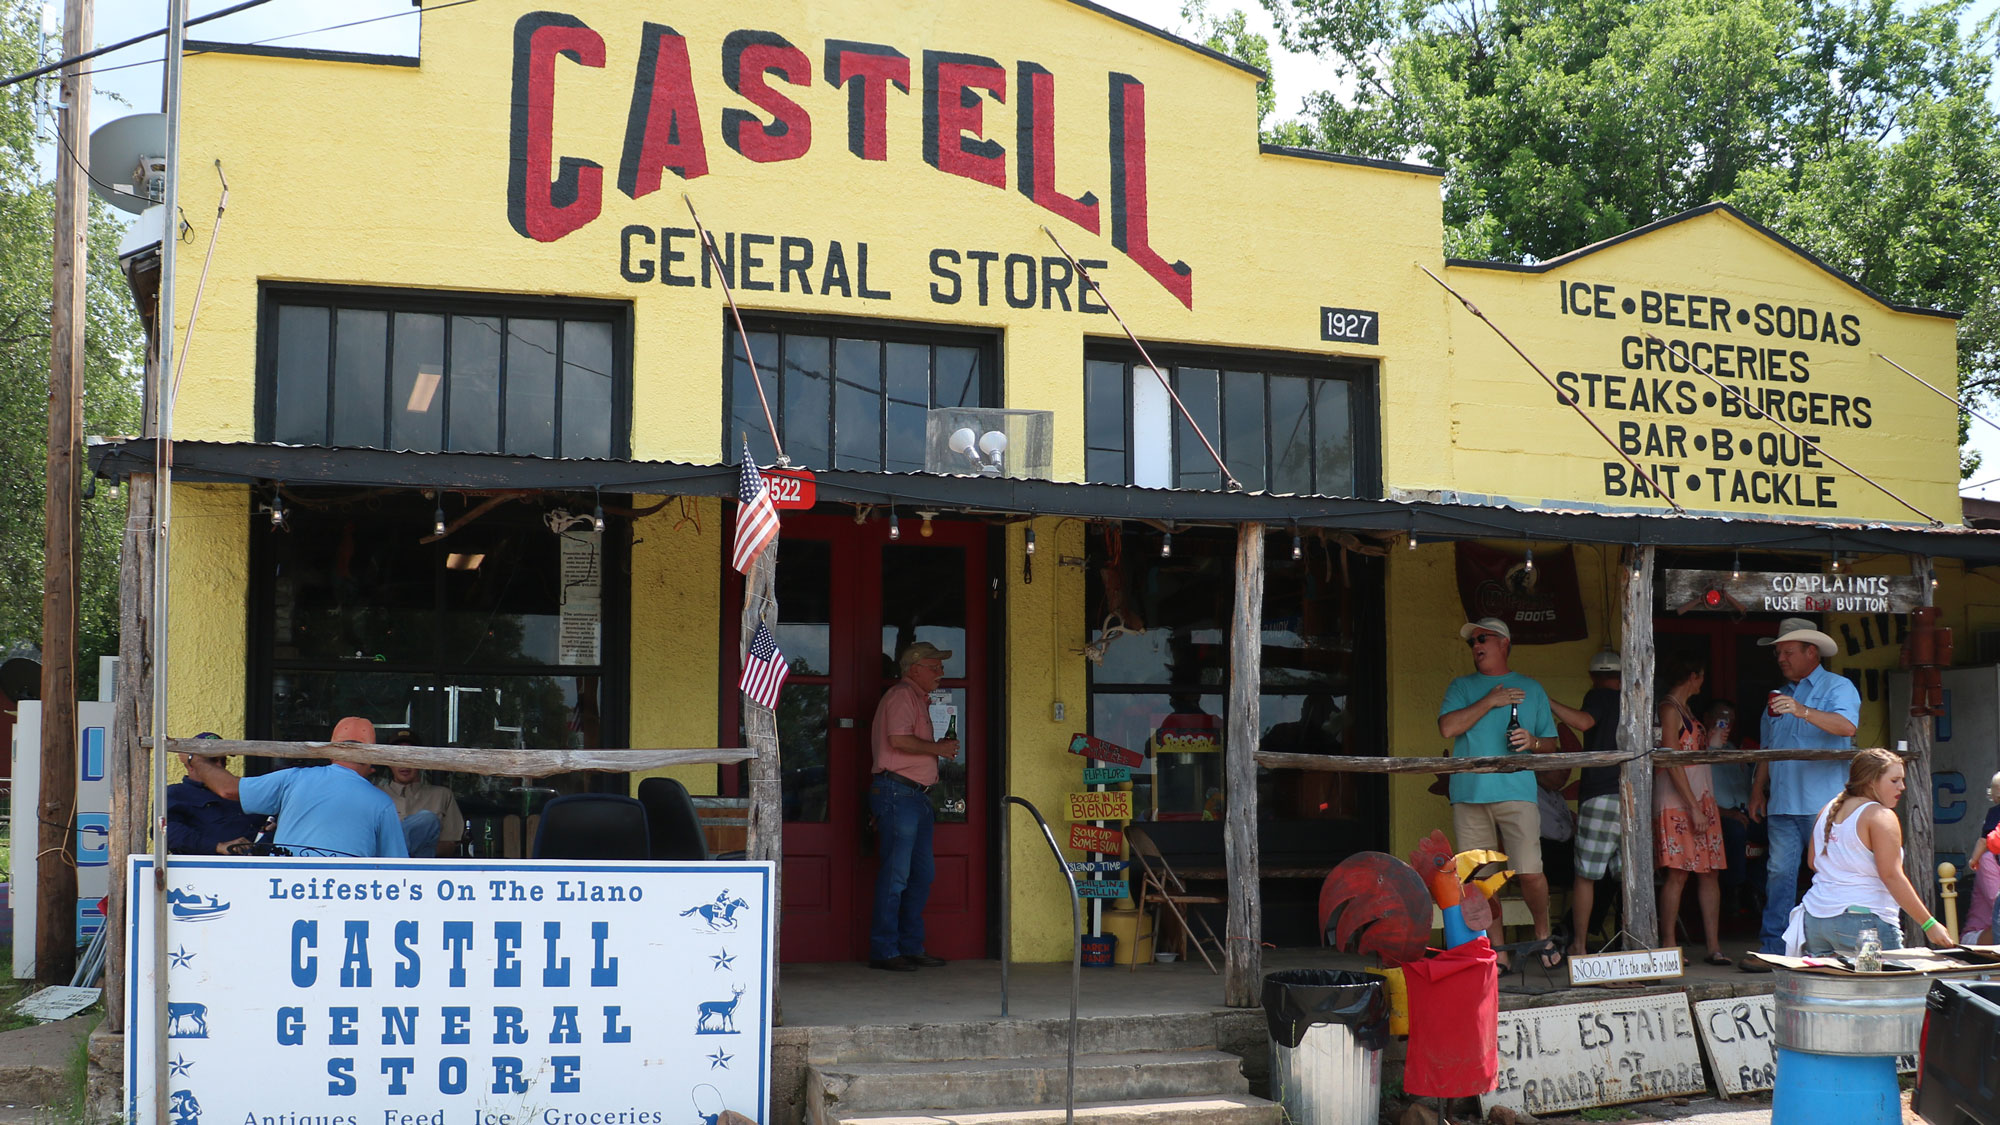 Castell extends a warm welcome to visitors